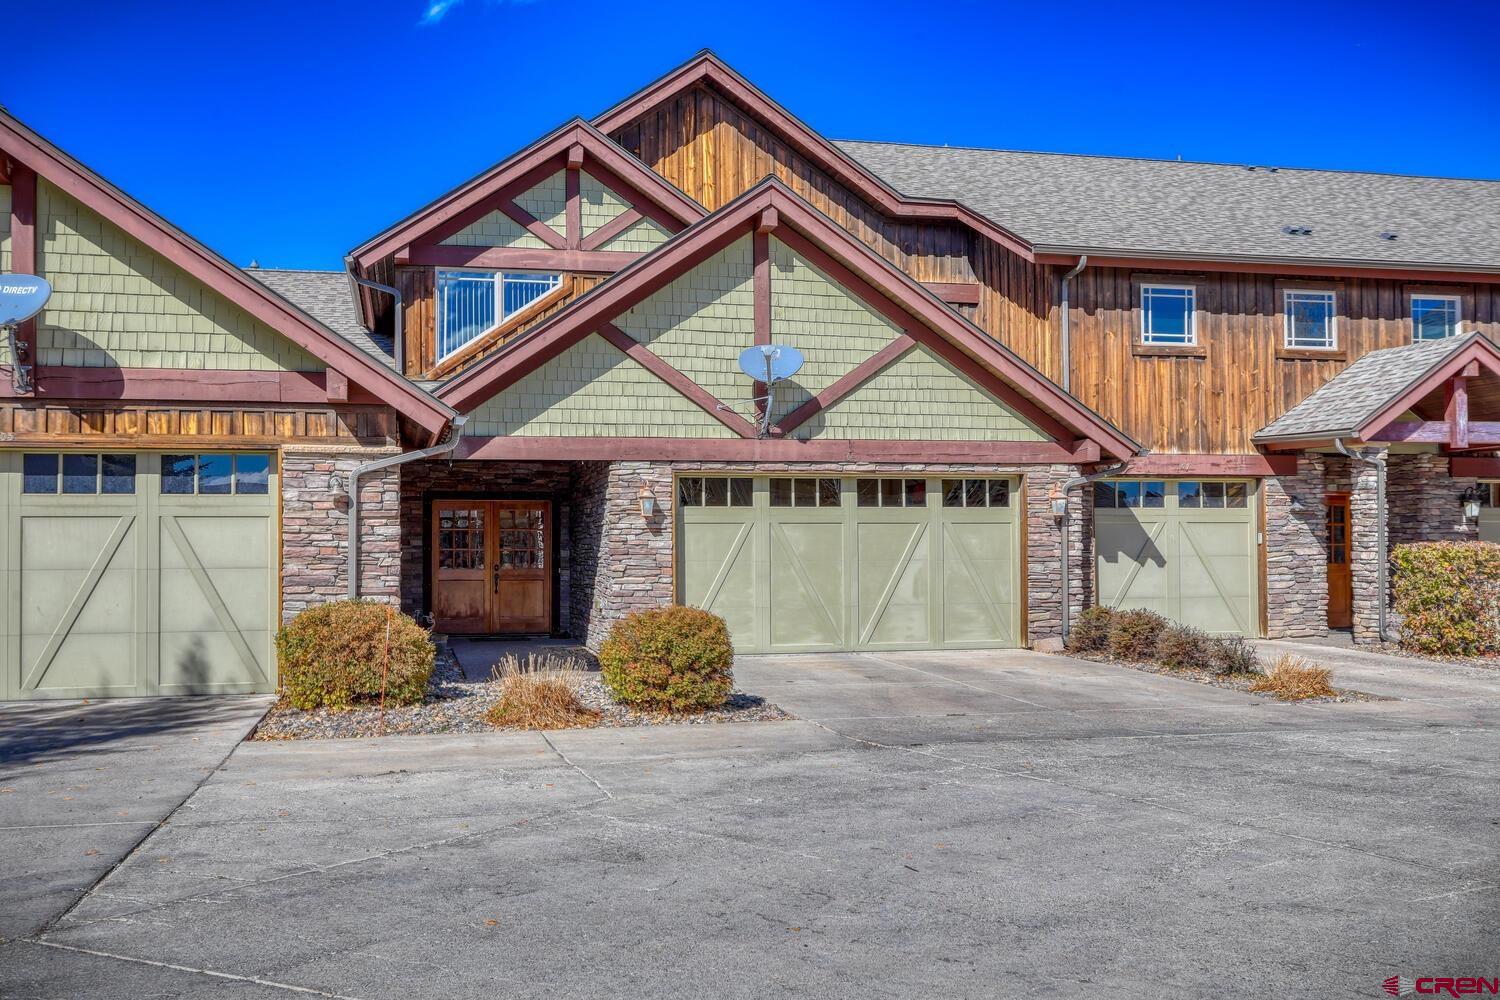 Photo of 431 Talisman Dr 106 in Pagosa Springs, CO